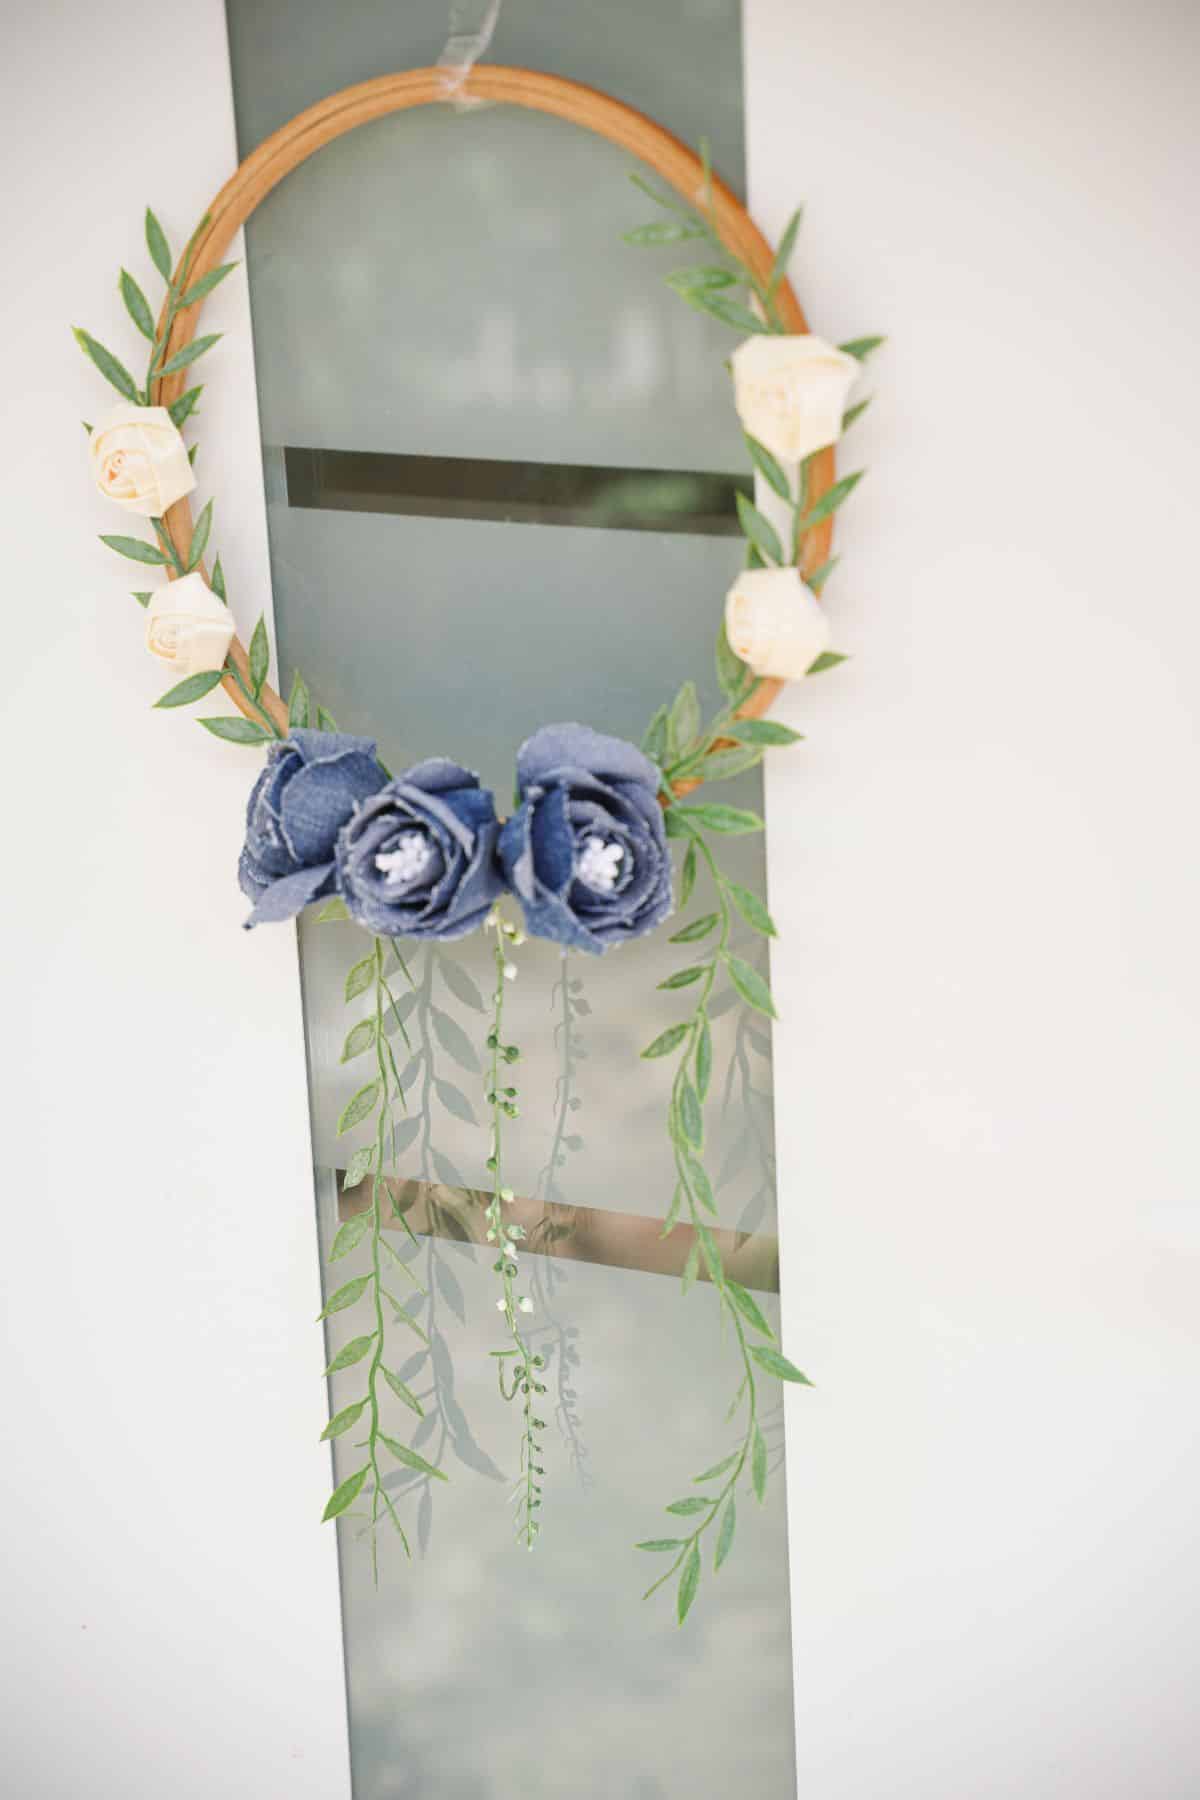 white rose and denim flower wreath hanging on white door with glass panel